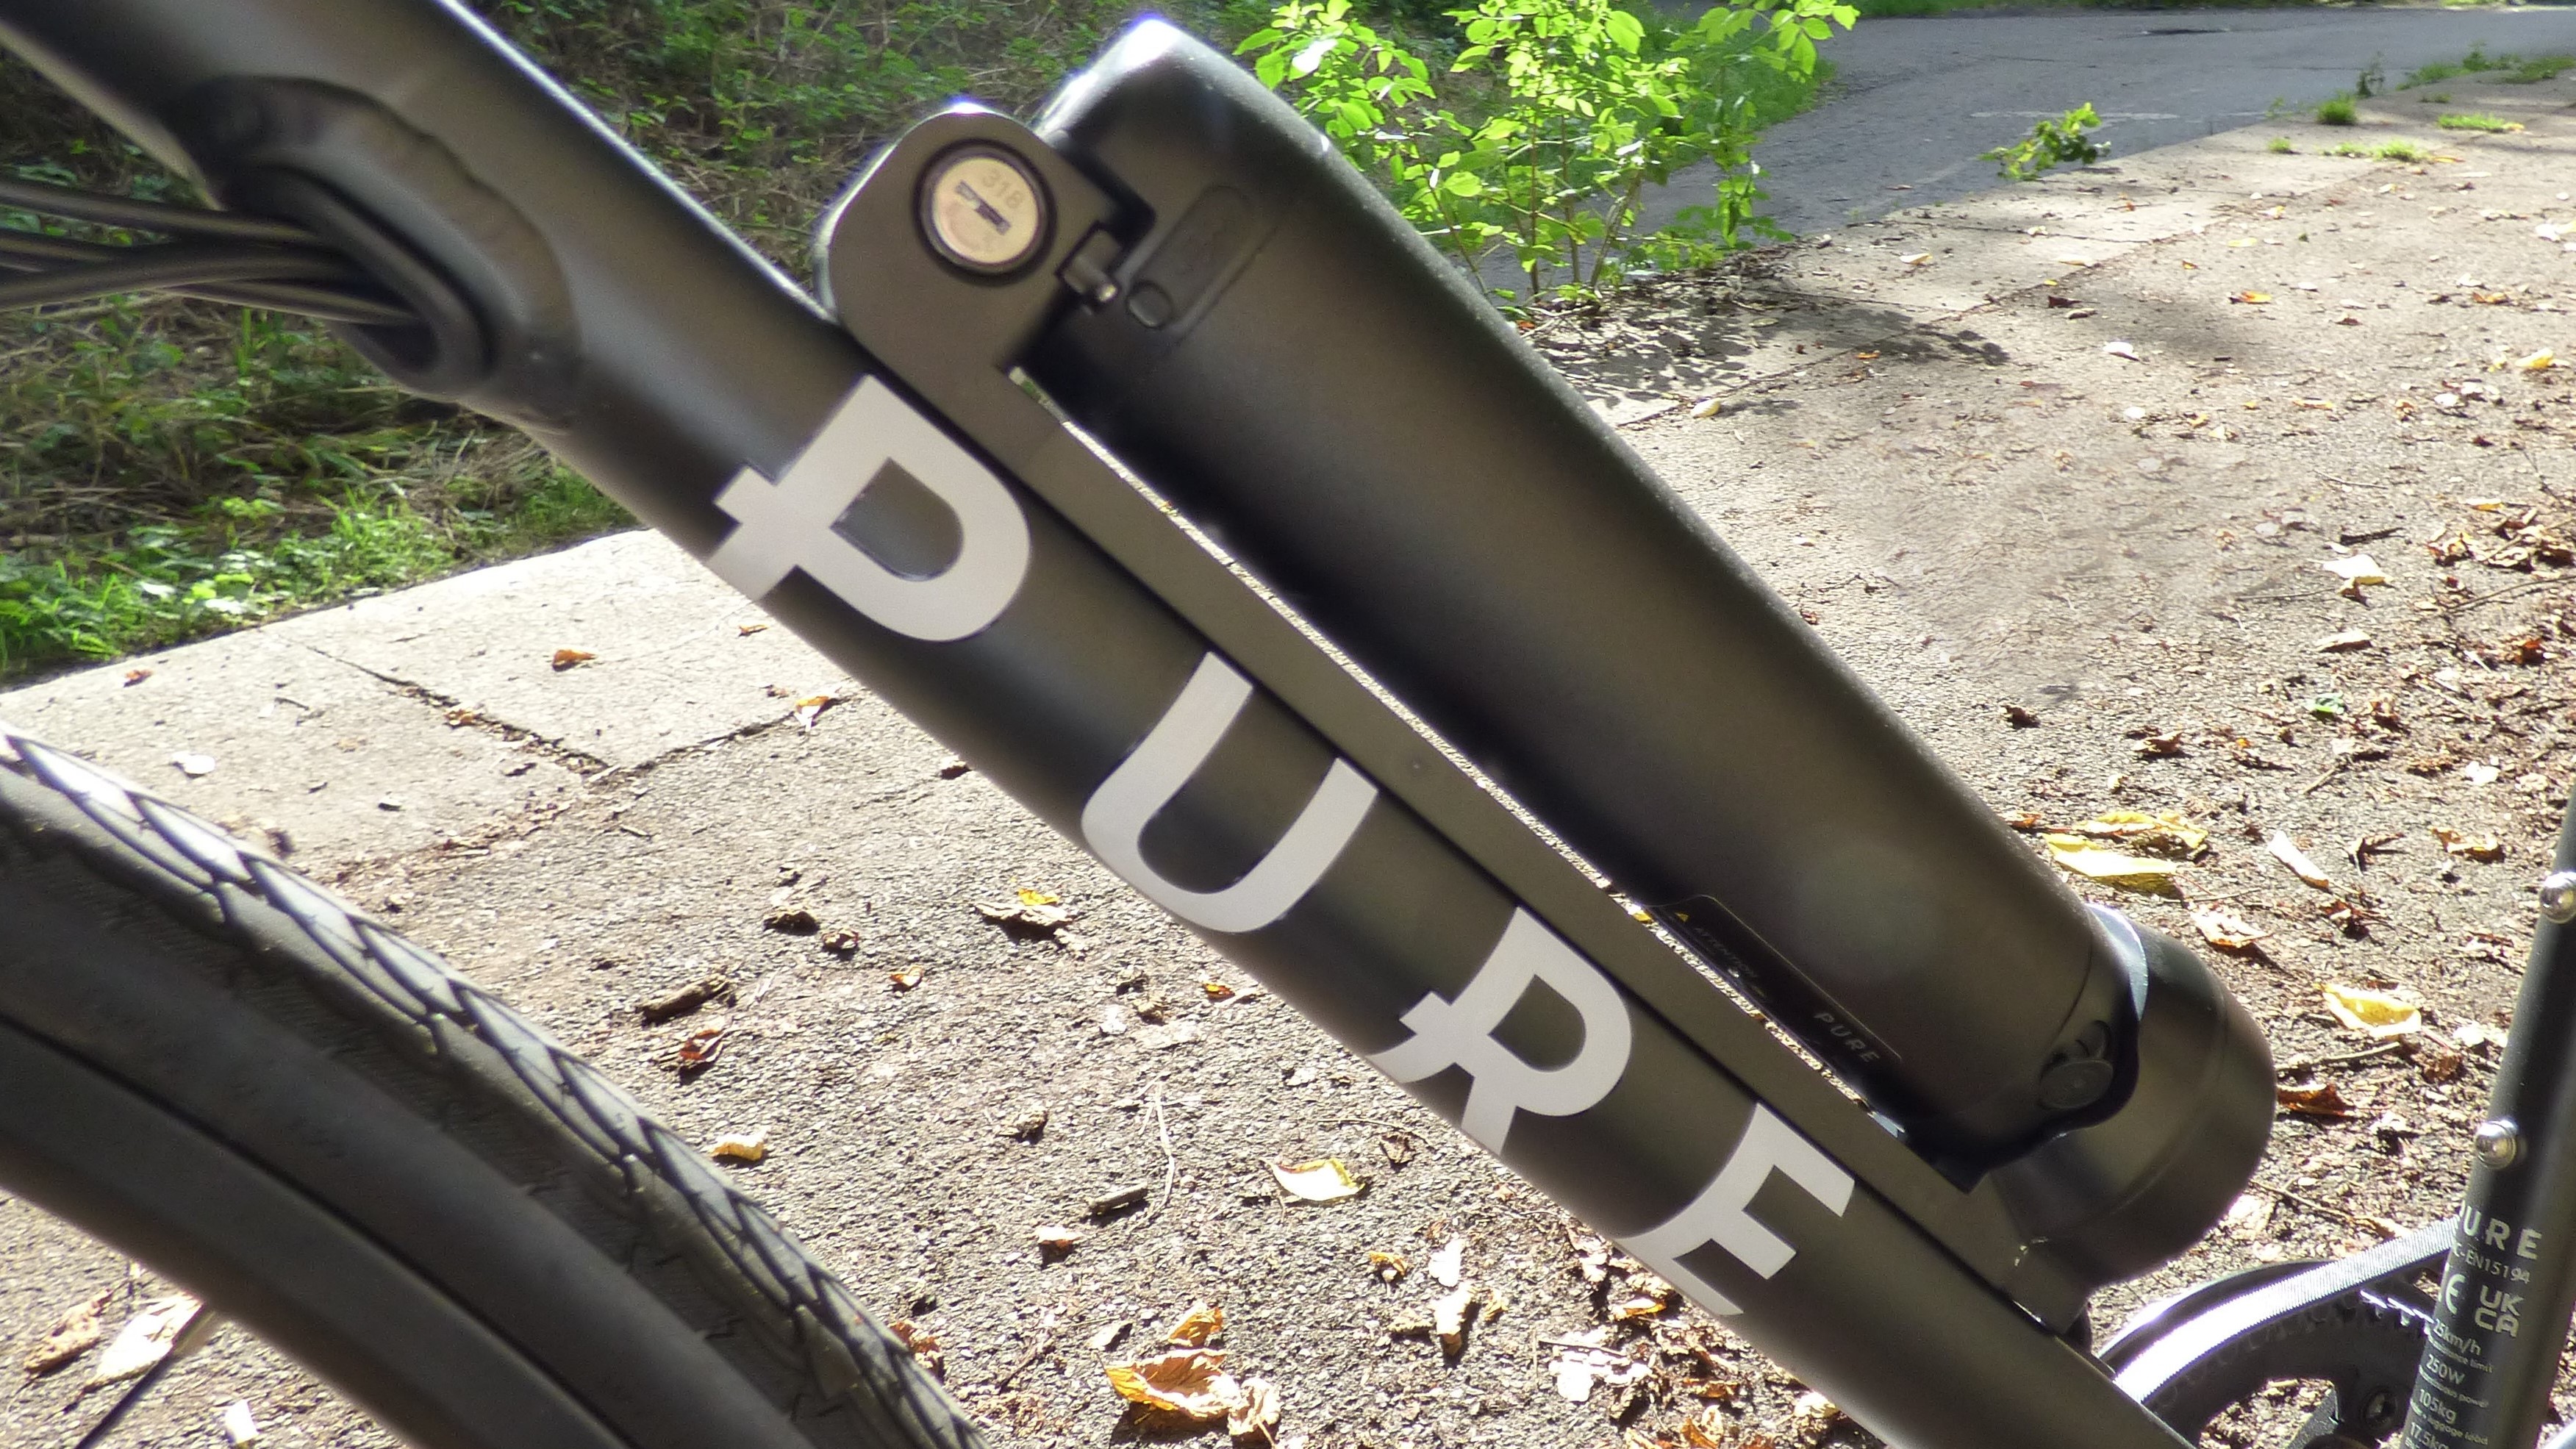 Pure Flux One battery pack